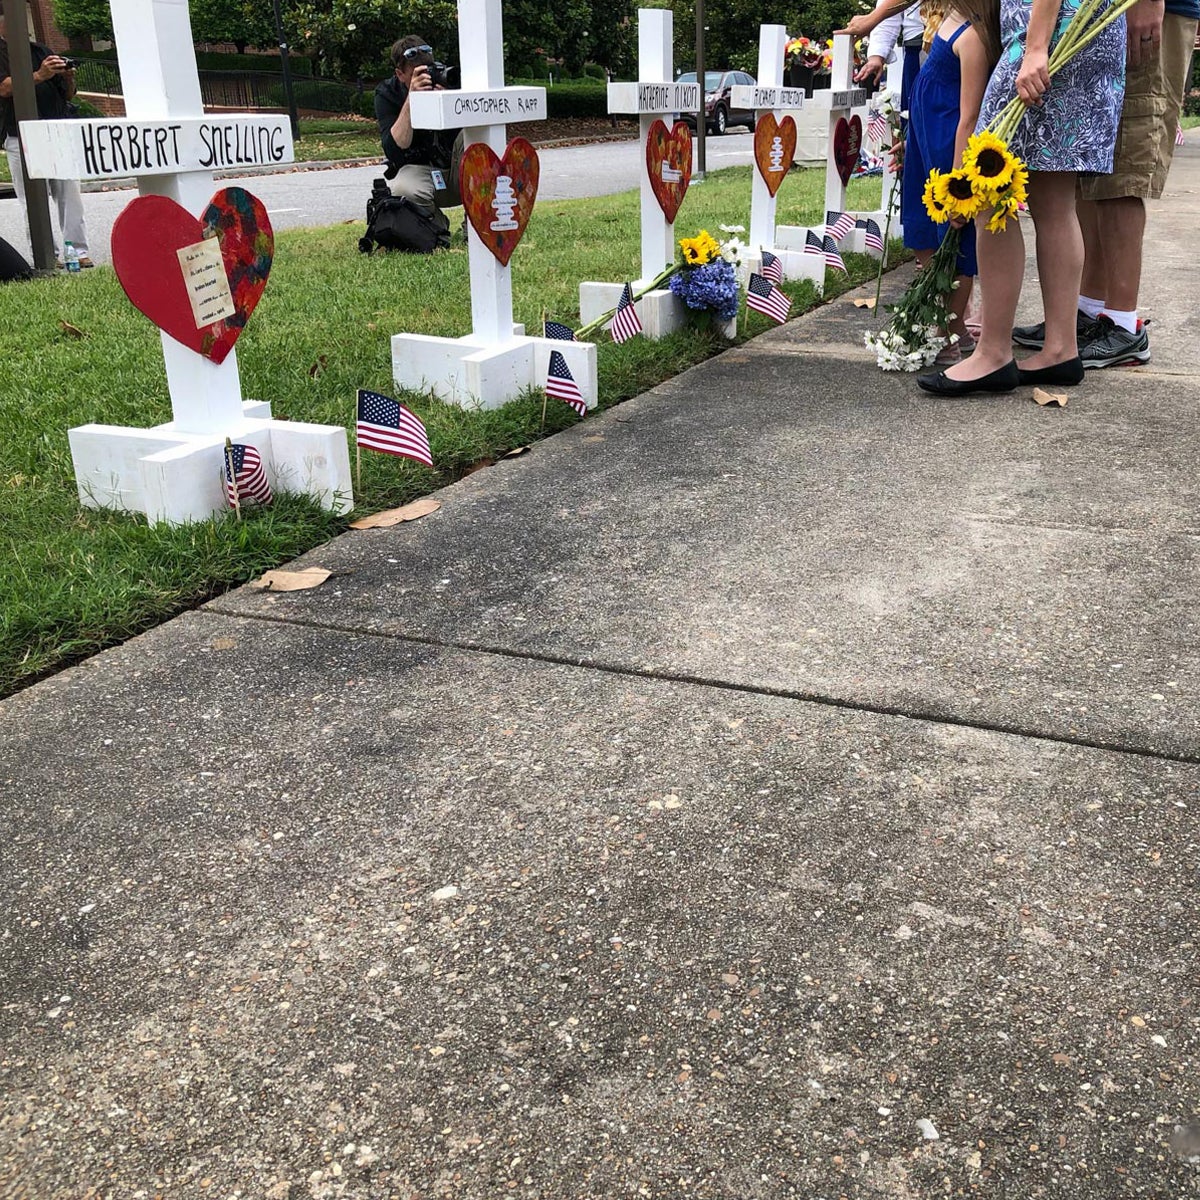 A memorial to the victims of the Virginia Beach shooting.